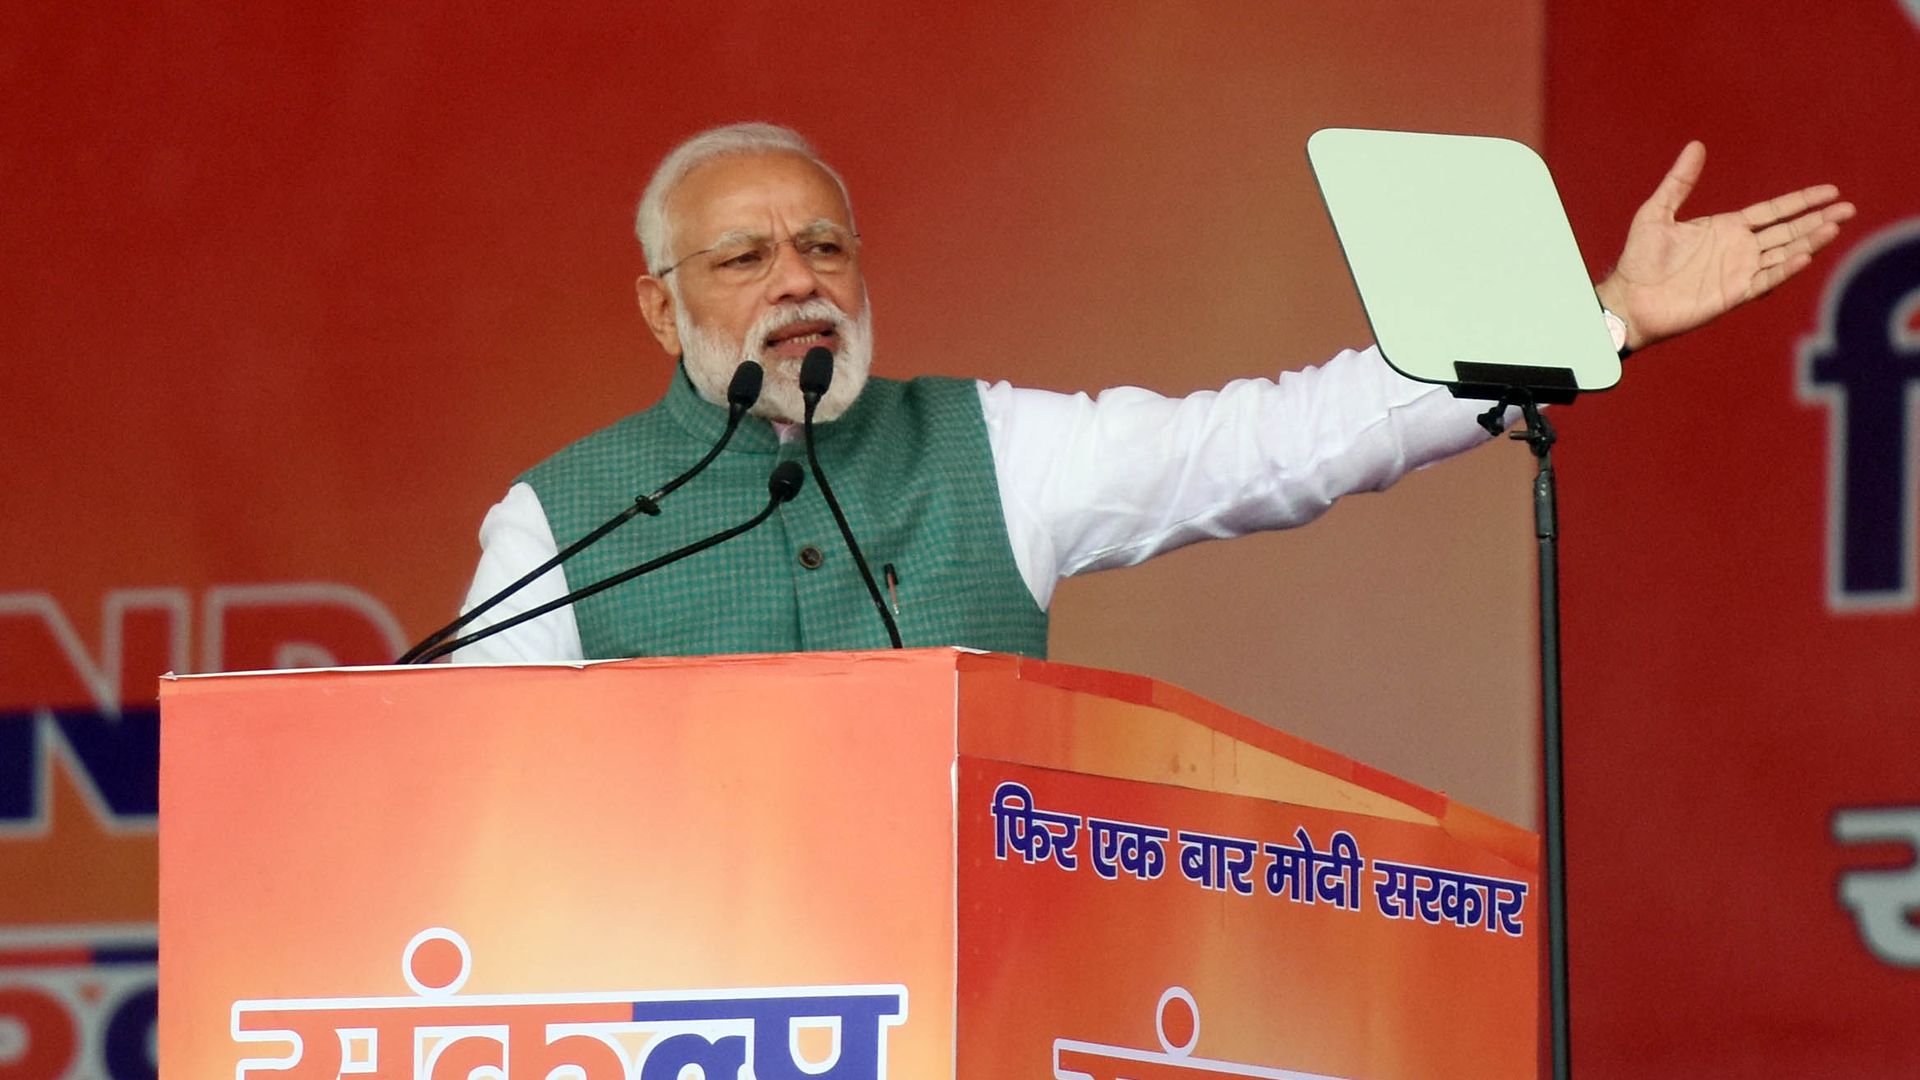 Prime Minister Narendra Modi addresses his supporters during Sankalp Rally at Gandhi Maidan on March 3, 2019 in Patna, India.